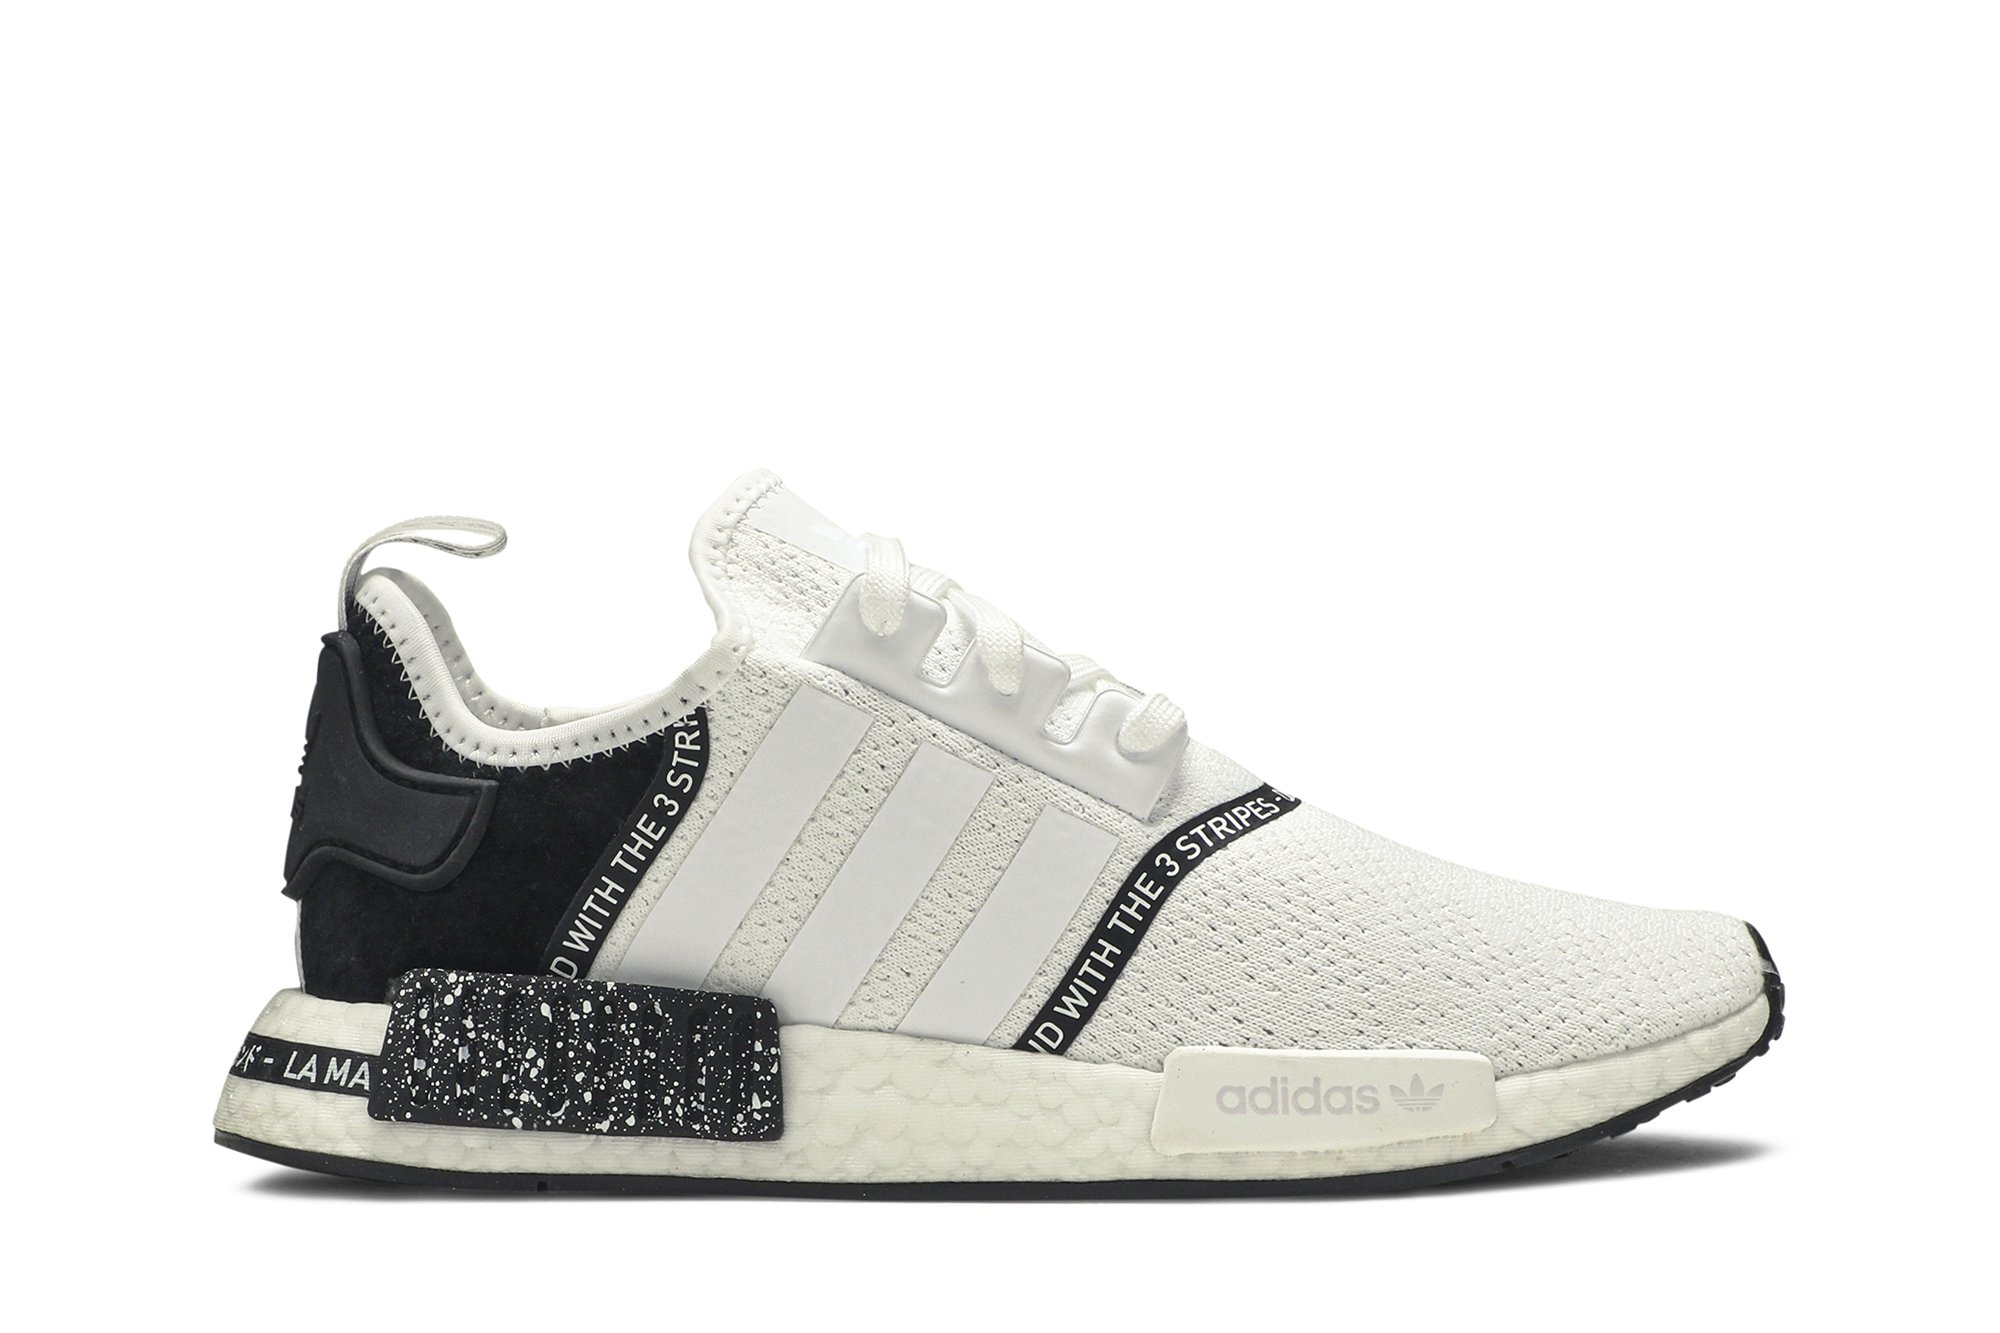 adidas nmd r1 traceable icons